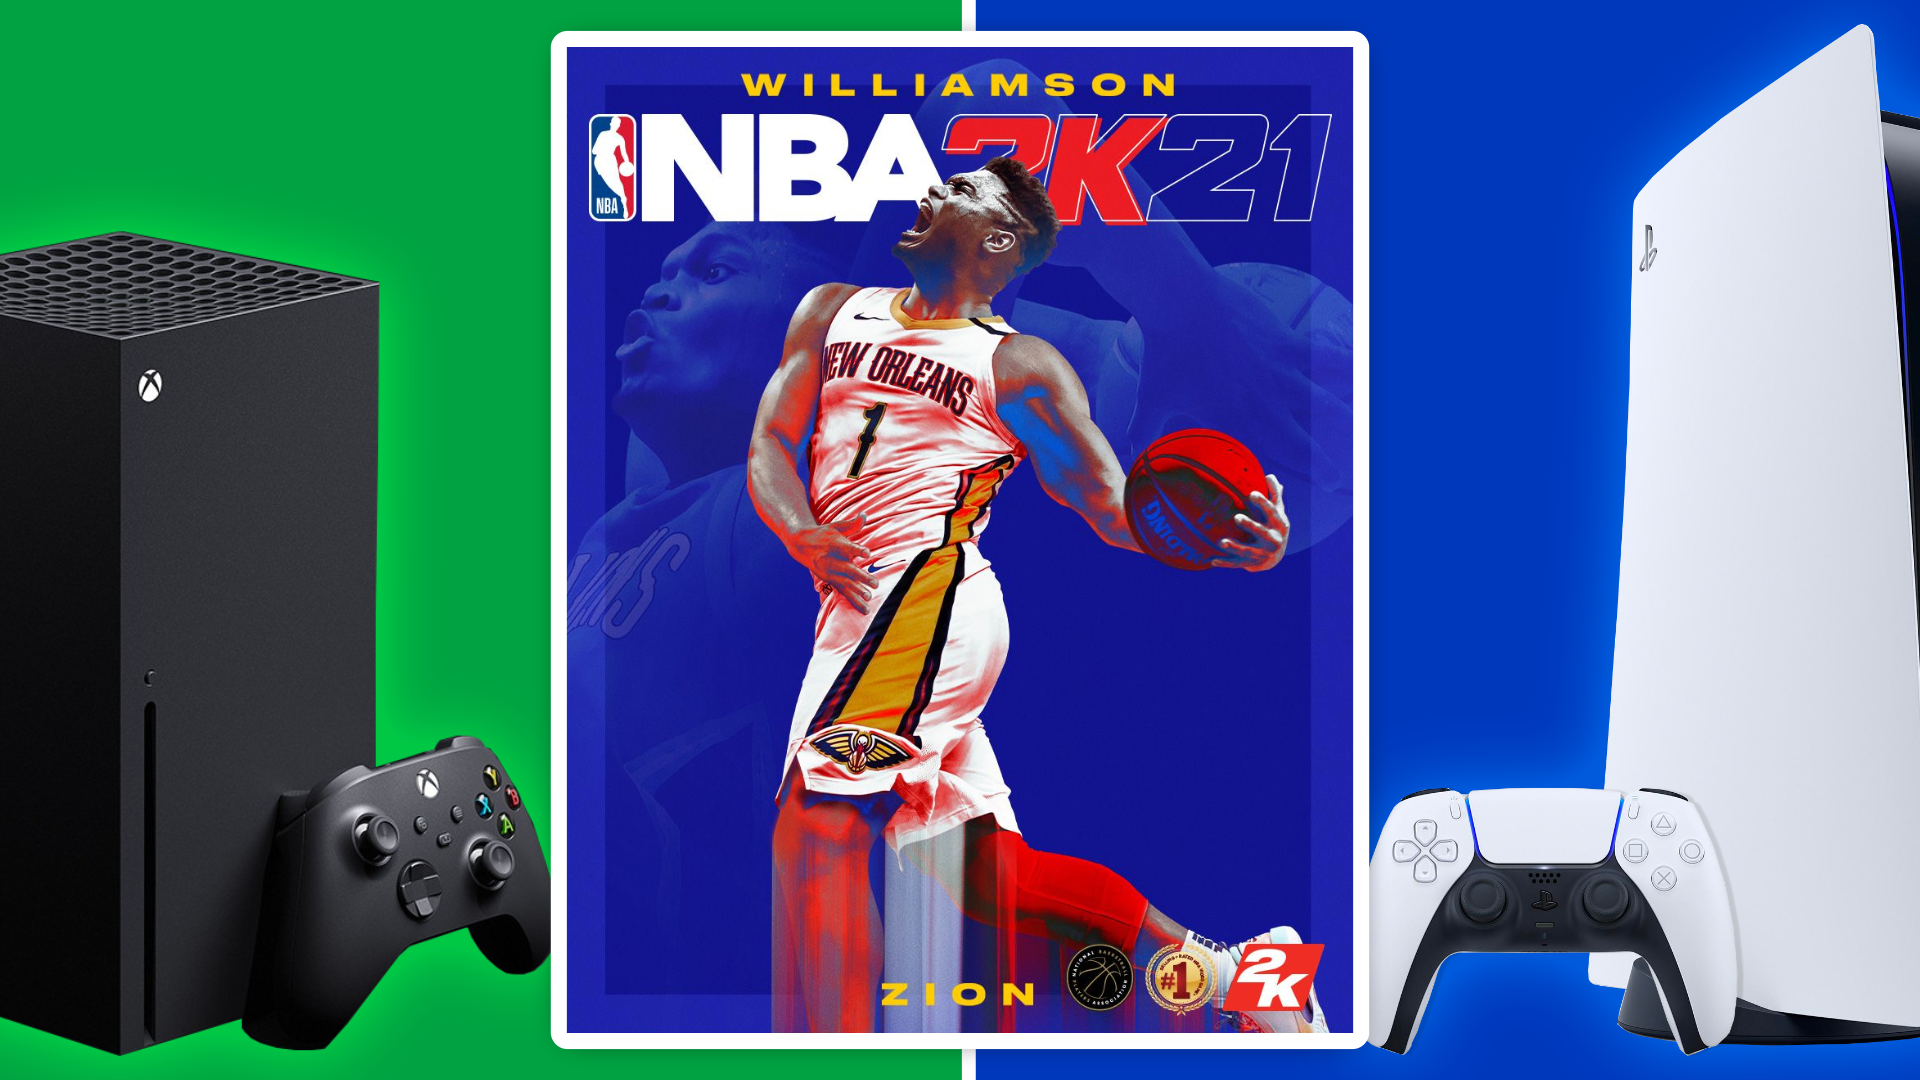 PS5 and Xbox Series X: Video game NBA 2K21 to cost more on new consoles